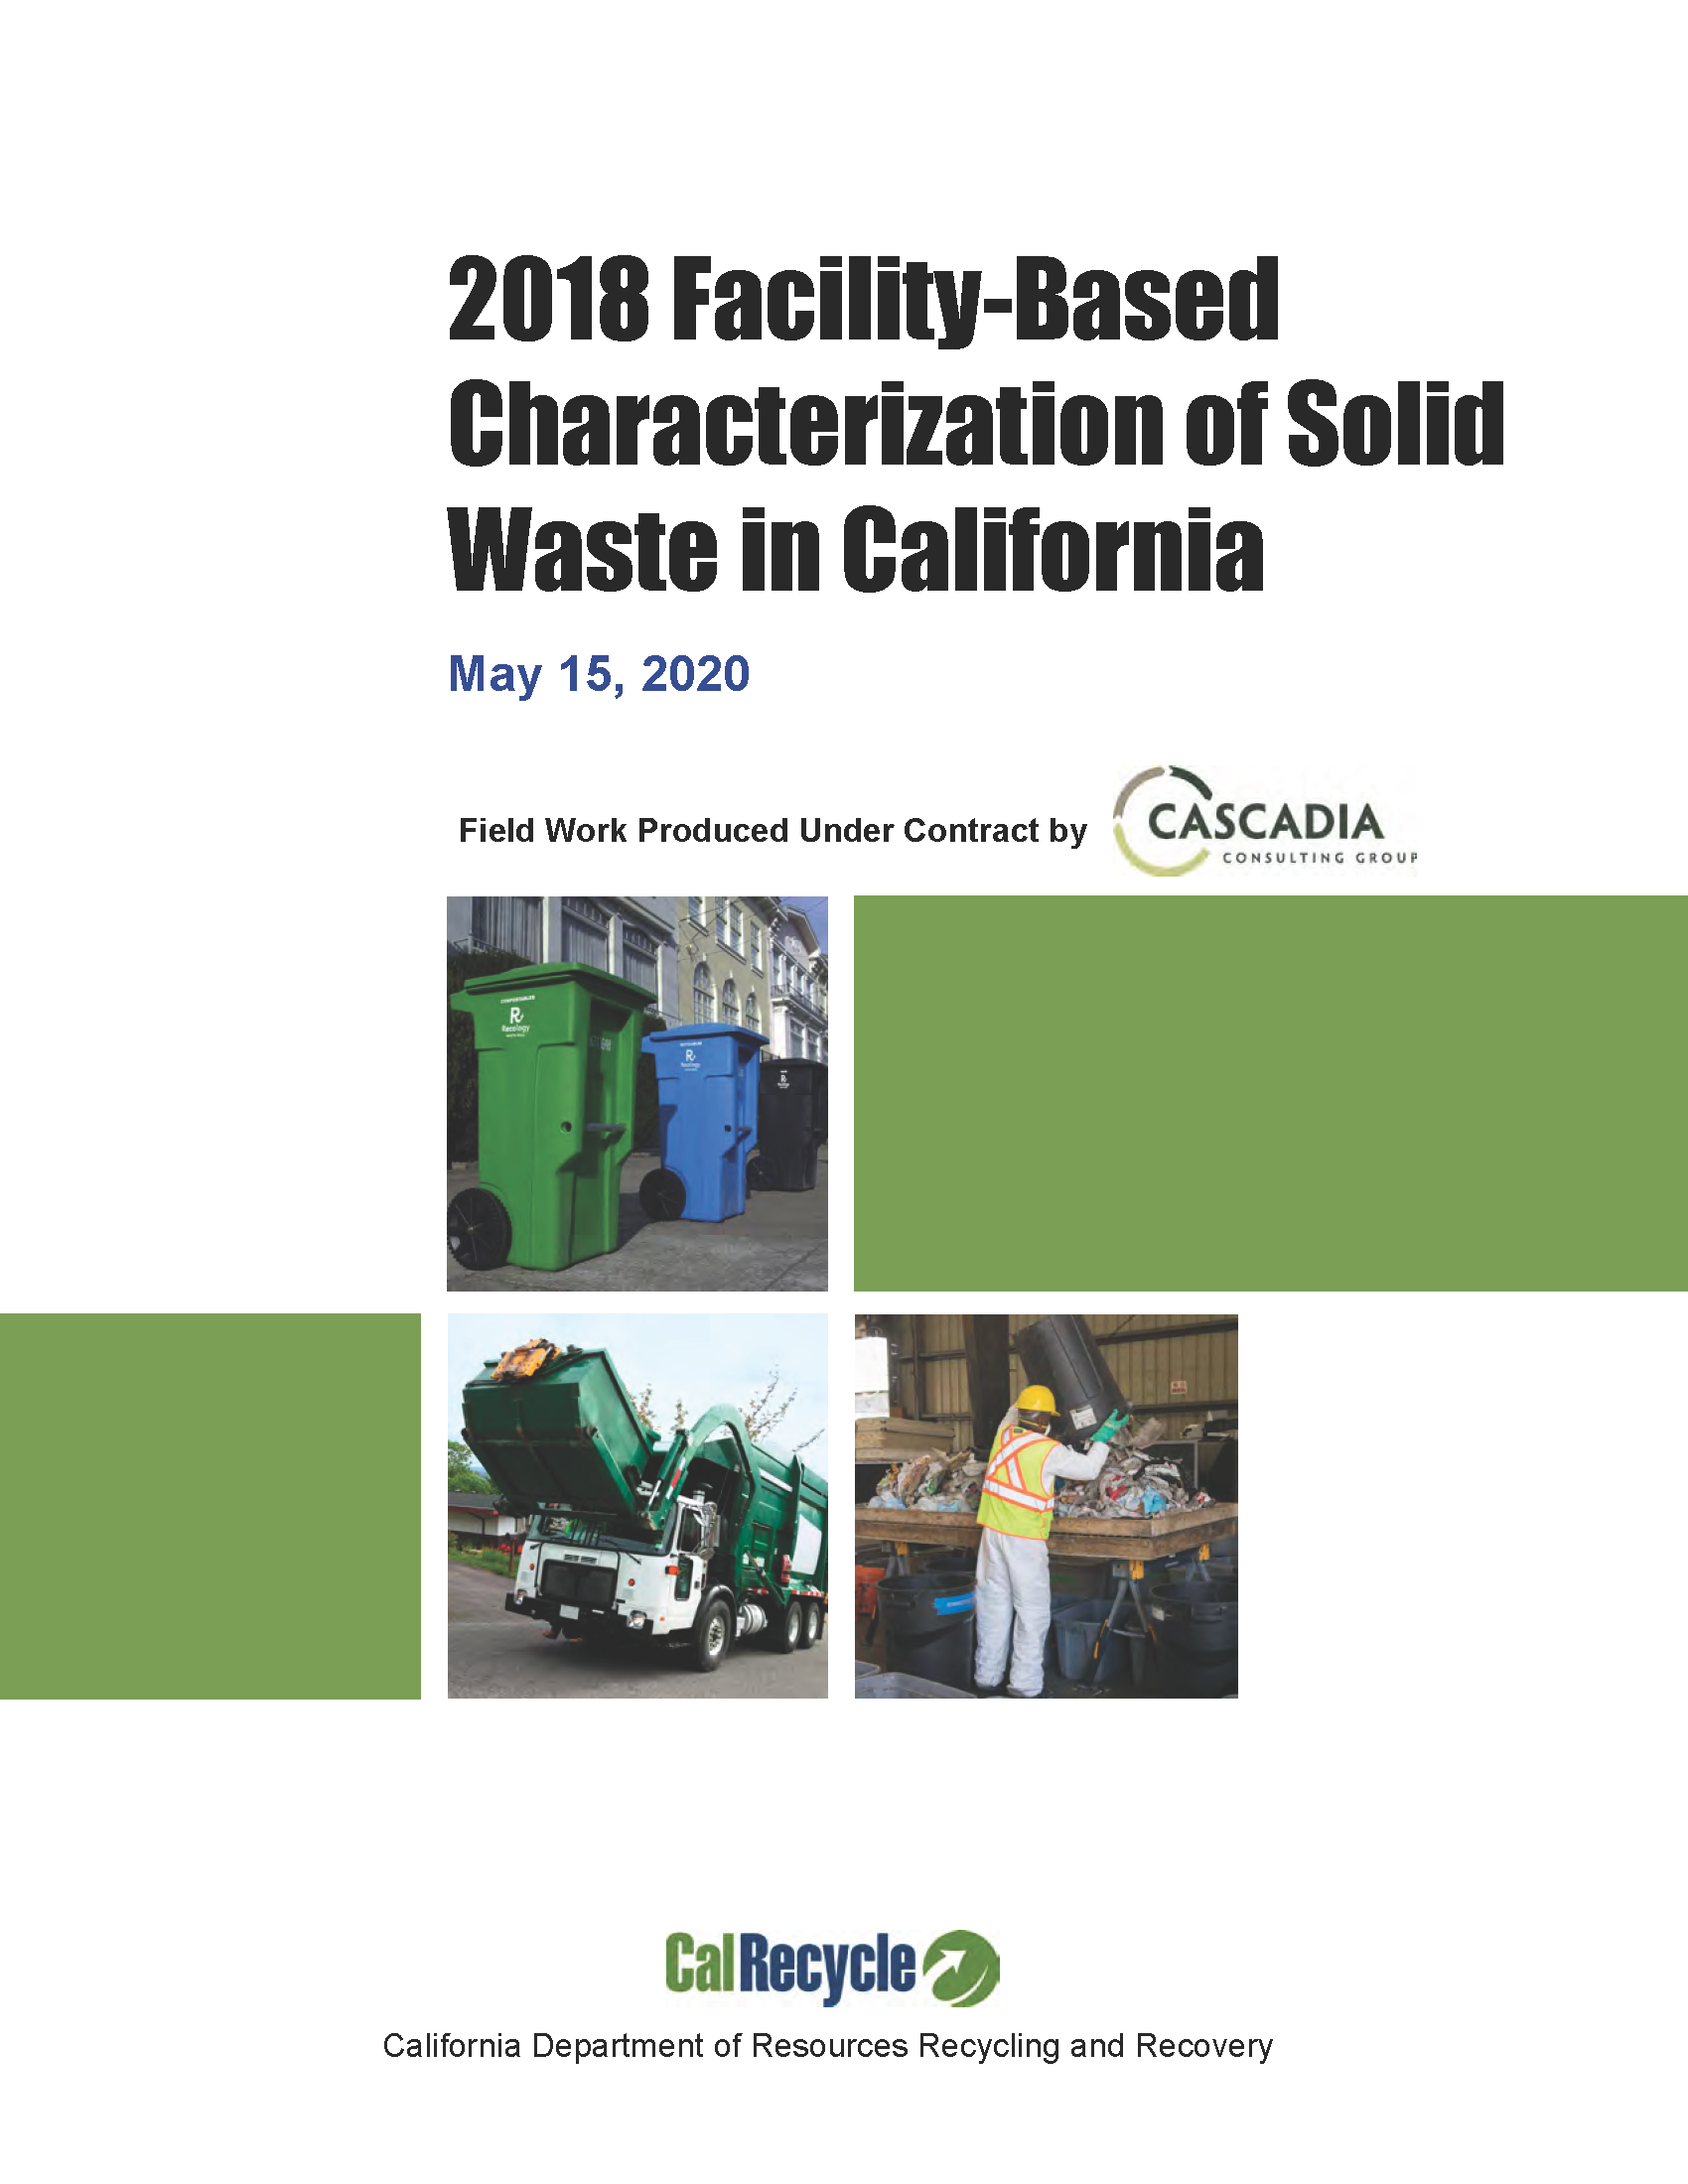 2018 Facility Based Characterization Report Cover